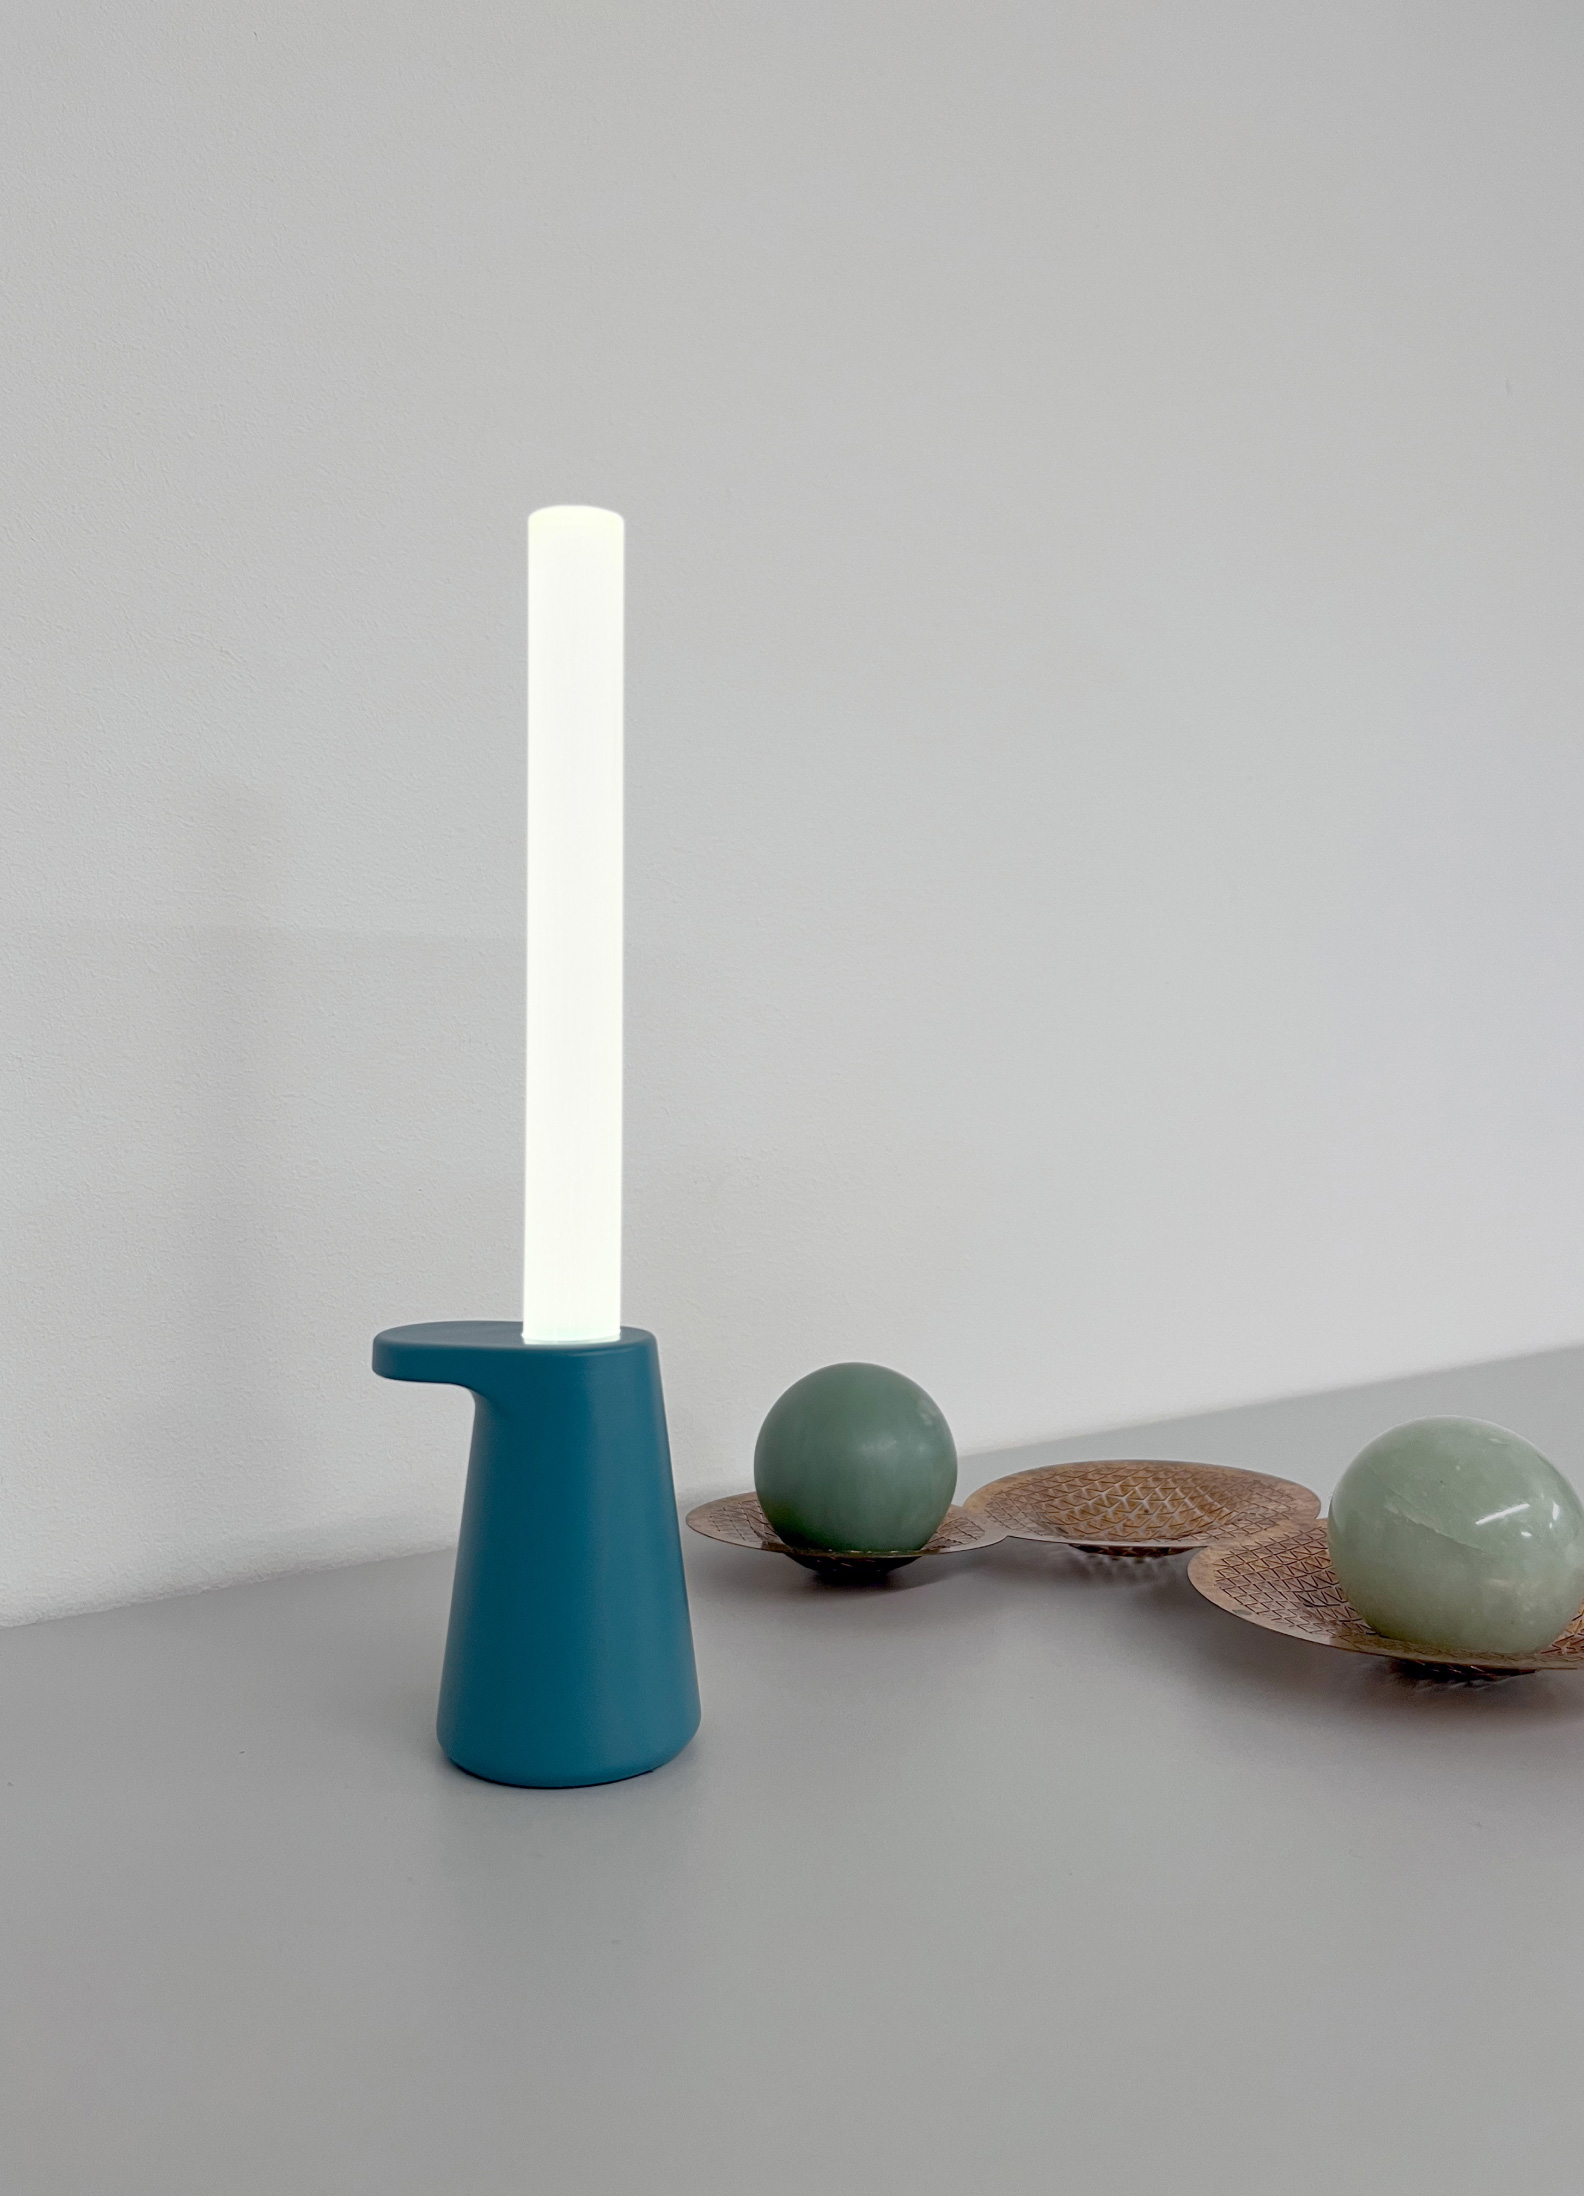 Photograph of the Candle light on a table beside other design objects.